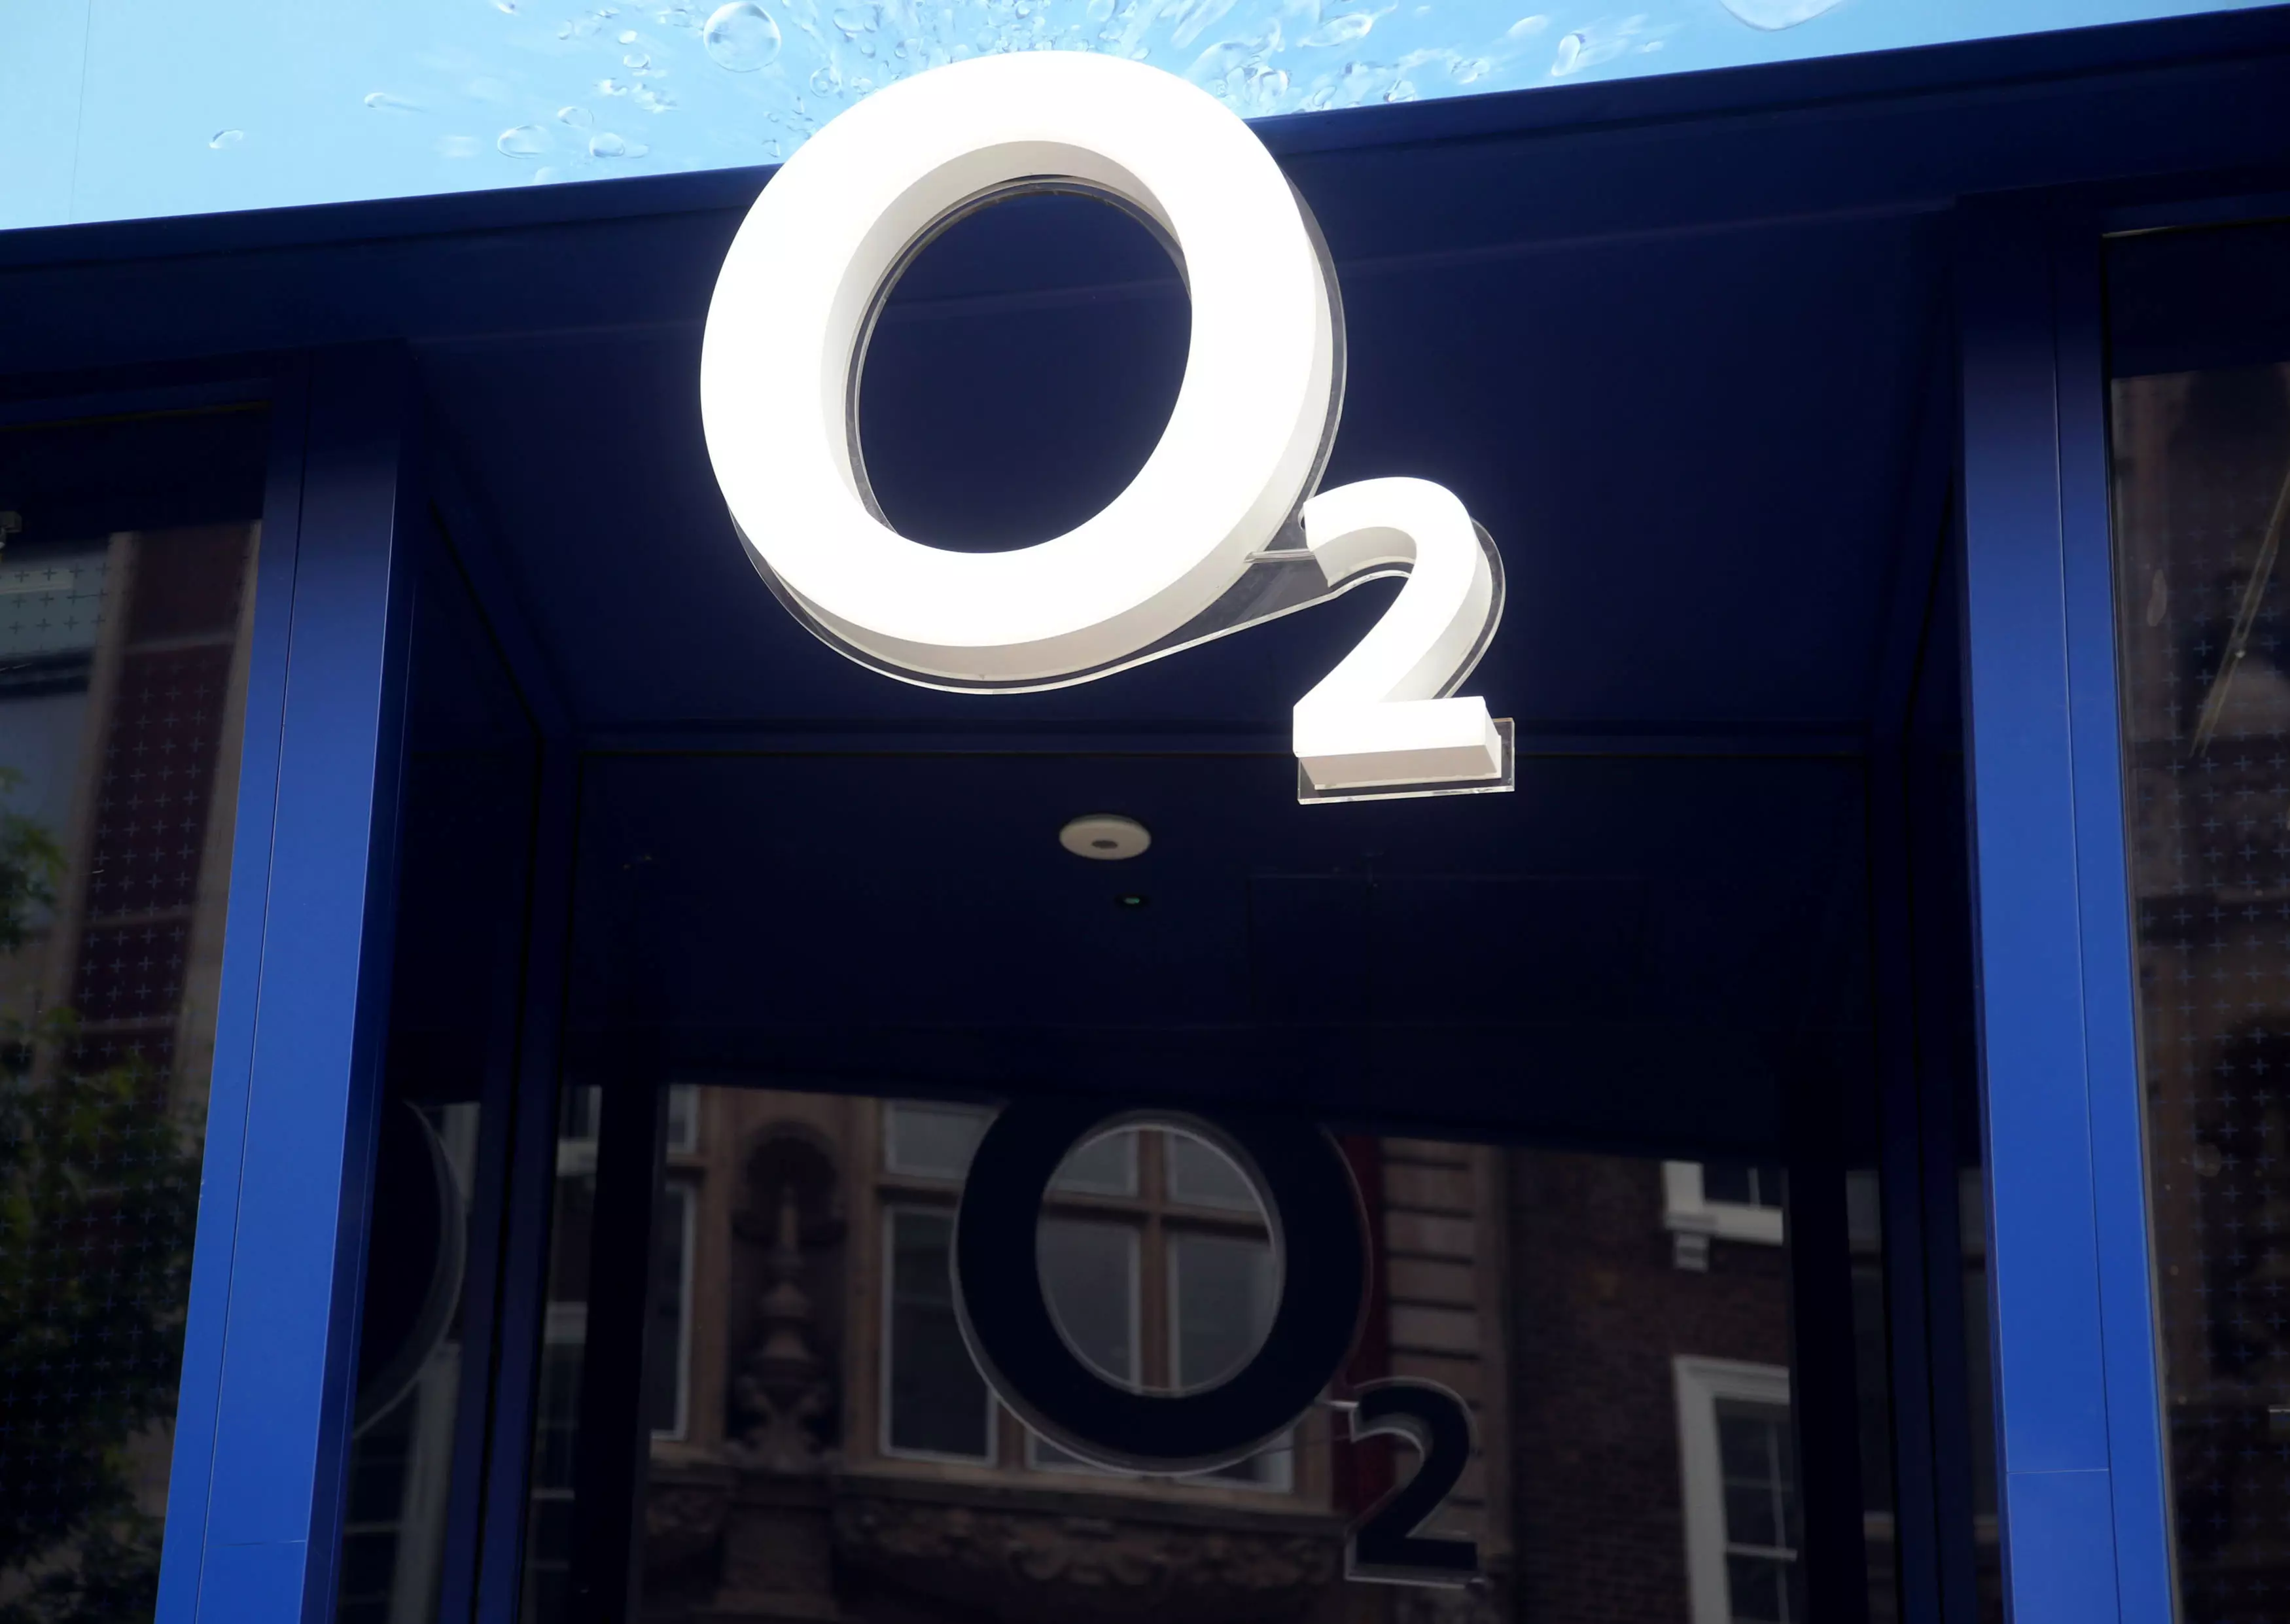 O2 customers and its subsidiaries were hit with day-long data issues.